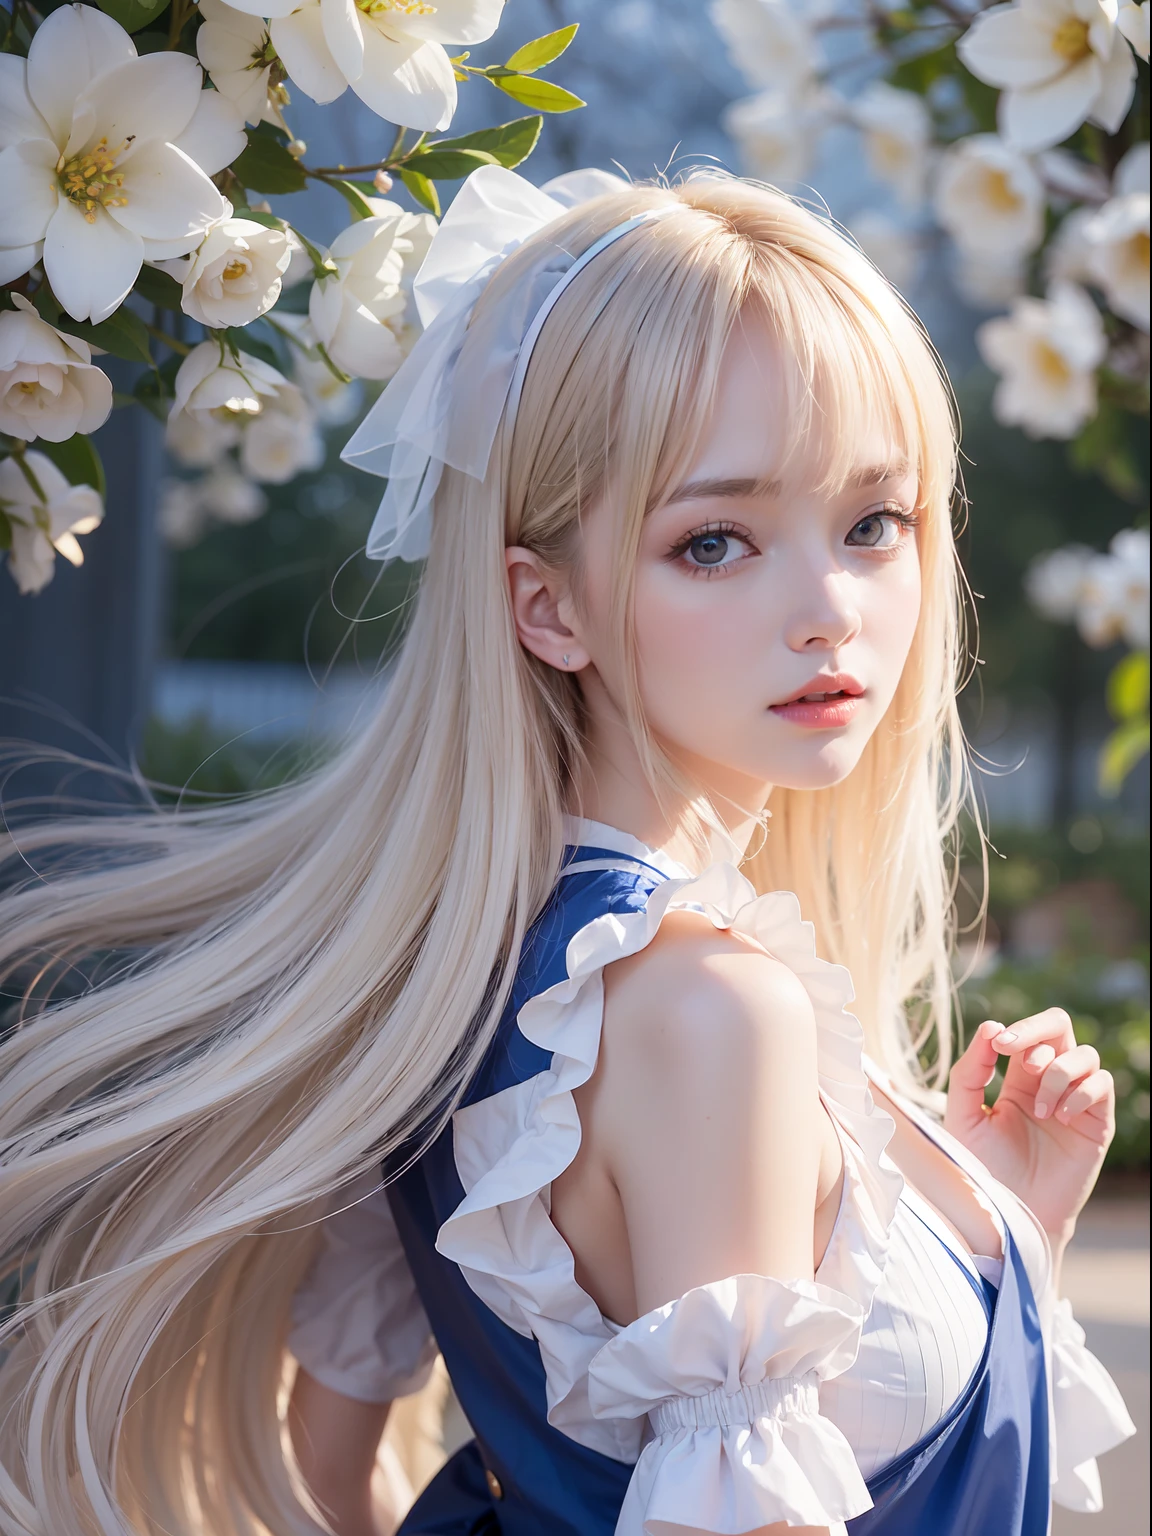 portlate、Alice in Wonderland、Blue sky、Bright and very beautiful face、Young shiny shiny white shiny skin、Best Looks、Platinum blonde hair with dazzling highlights、Super long silky straight hair、Beautiful bangs that shine、Glowing crystal clear big blue eyes、Very beautiful lovely 16 year old beautiful girl、White Apron、Blue Dress